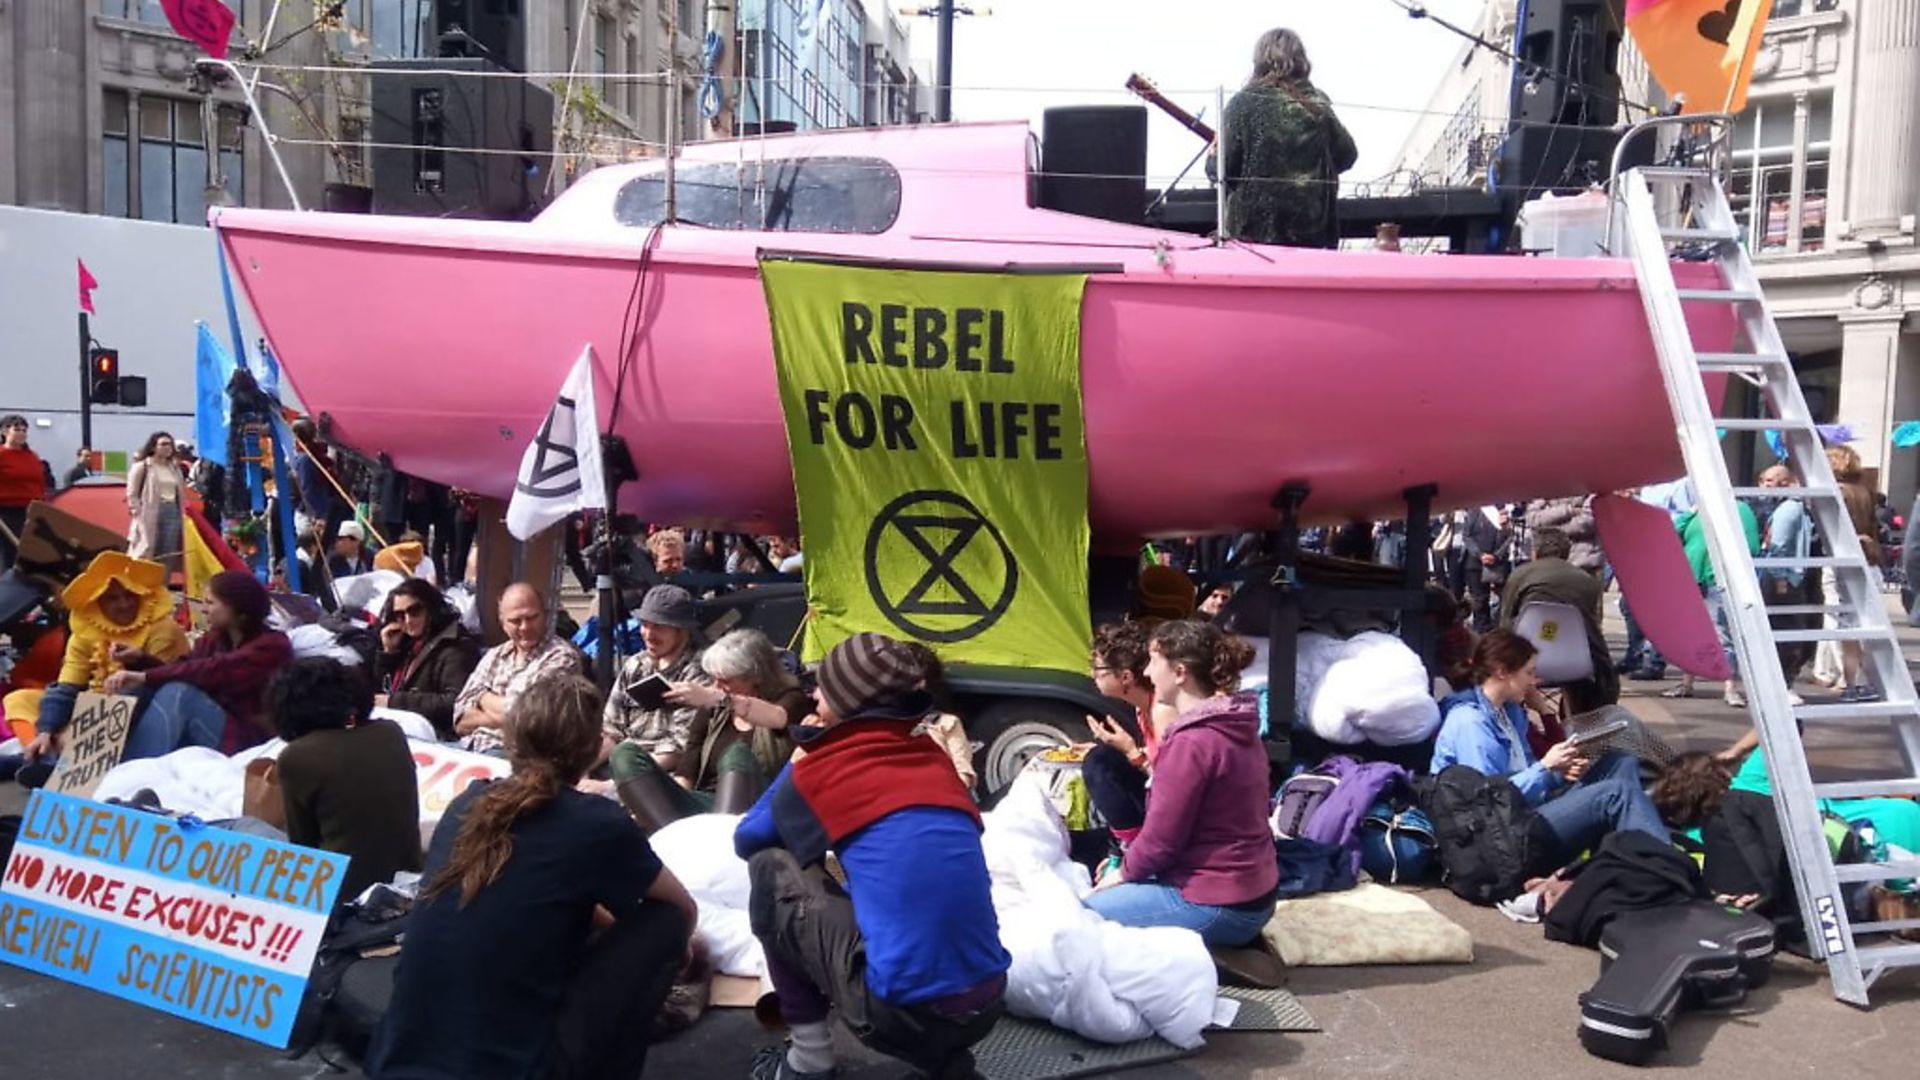 An Extinction Rebellion's climate change protest location in central London. Photo: ANNA MUNRO - Credit: Archant